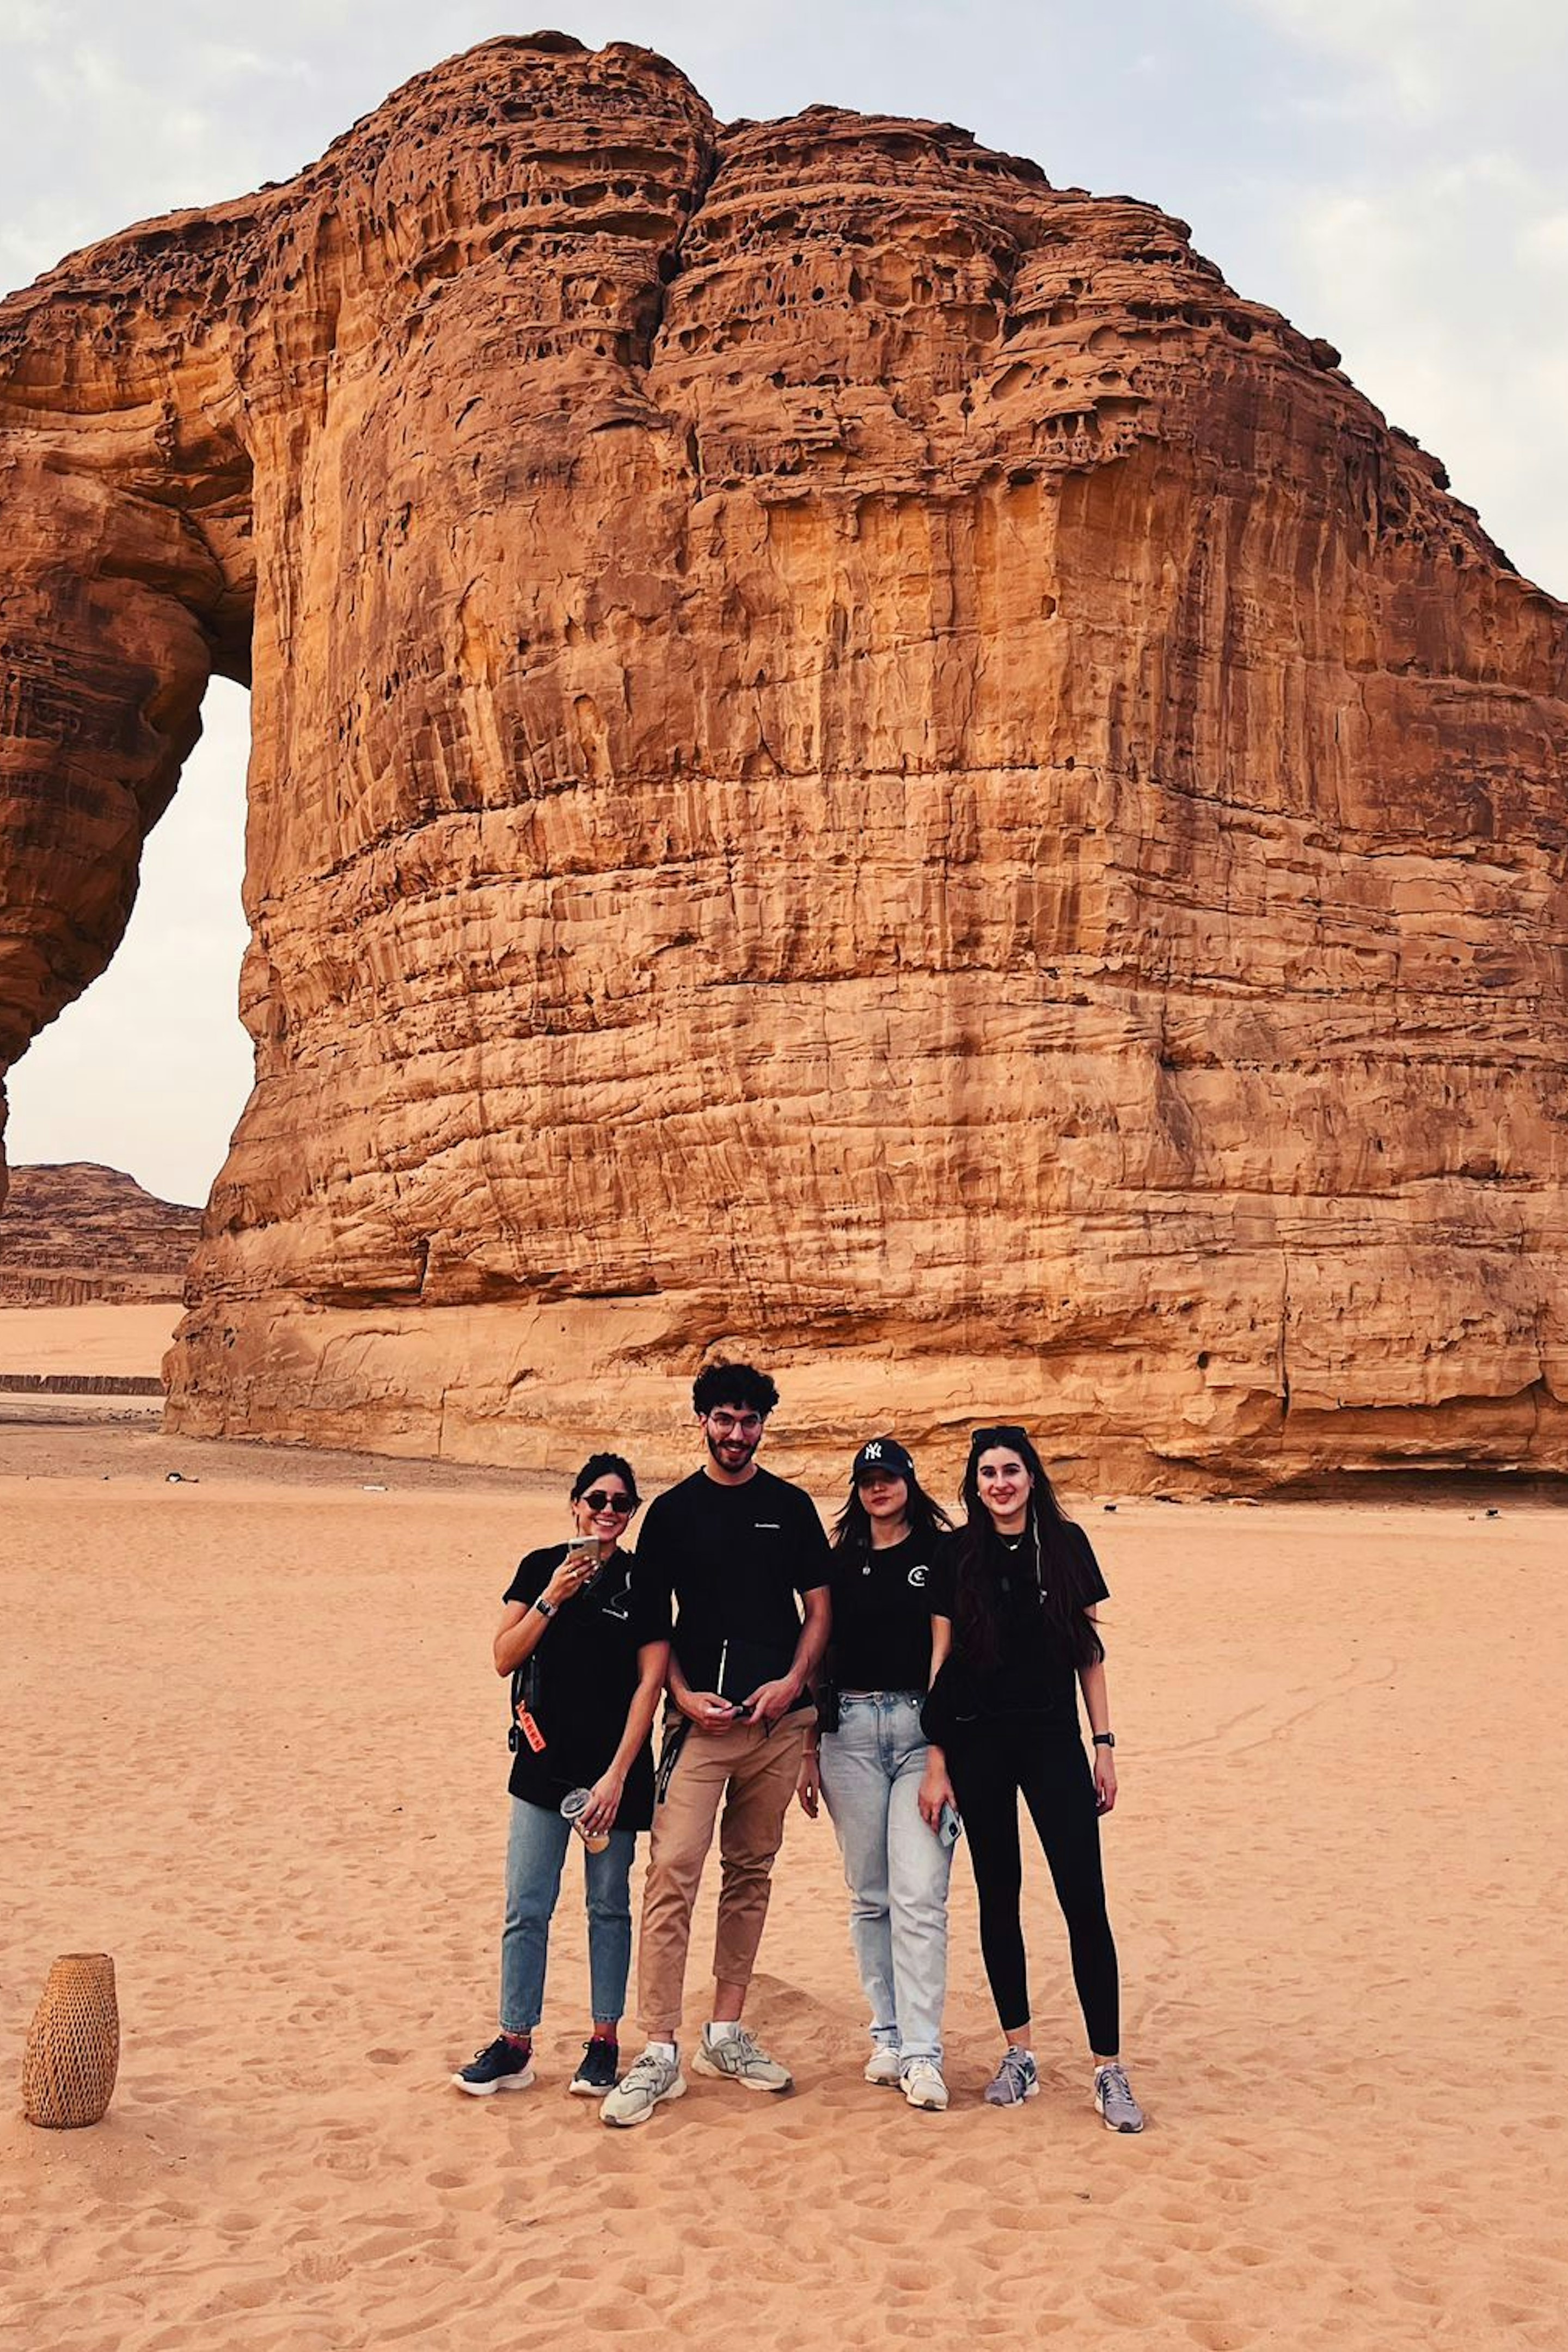 On location | electriclime° extend its filming reach with stunning, visual shoot in Saudi Arabia